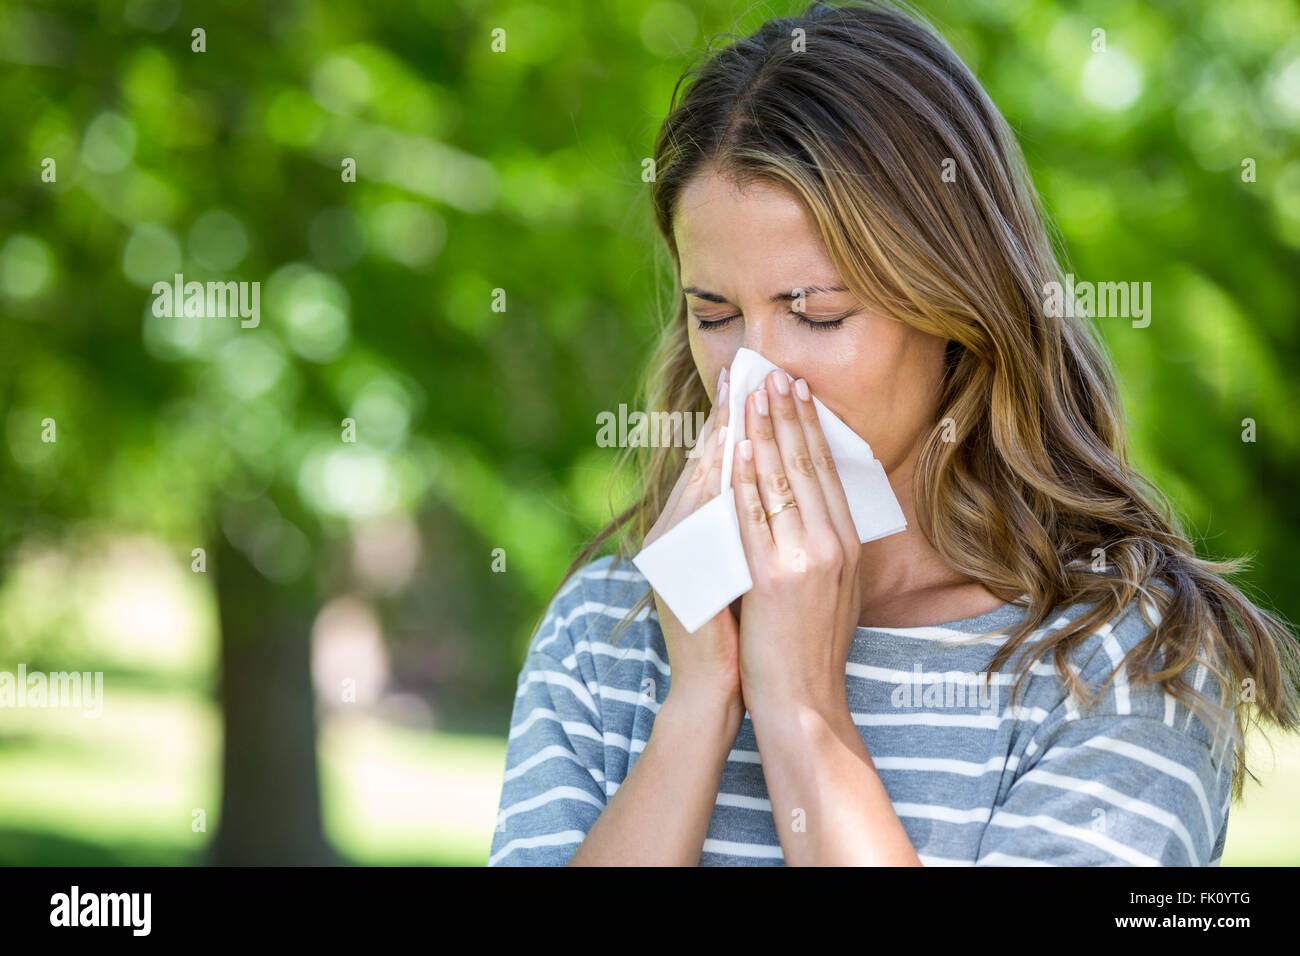 Woman using a tissue Stock Photo